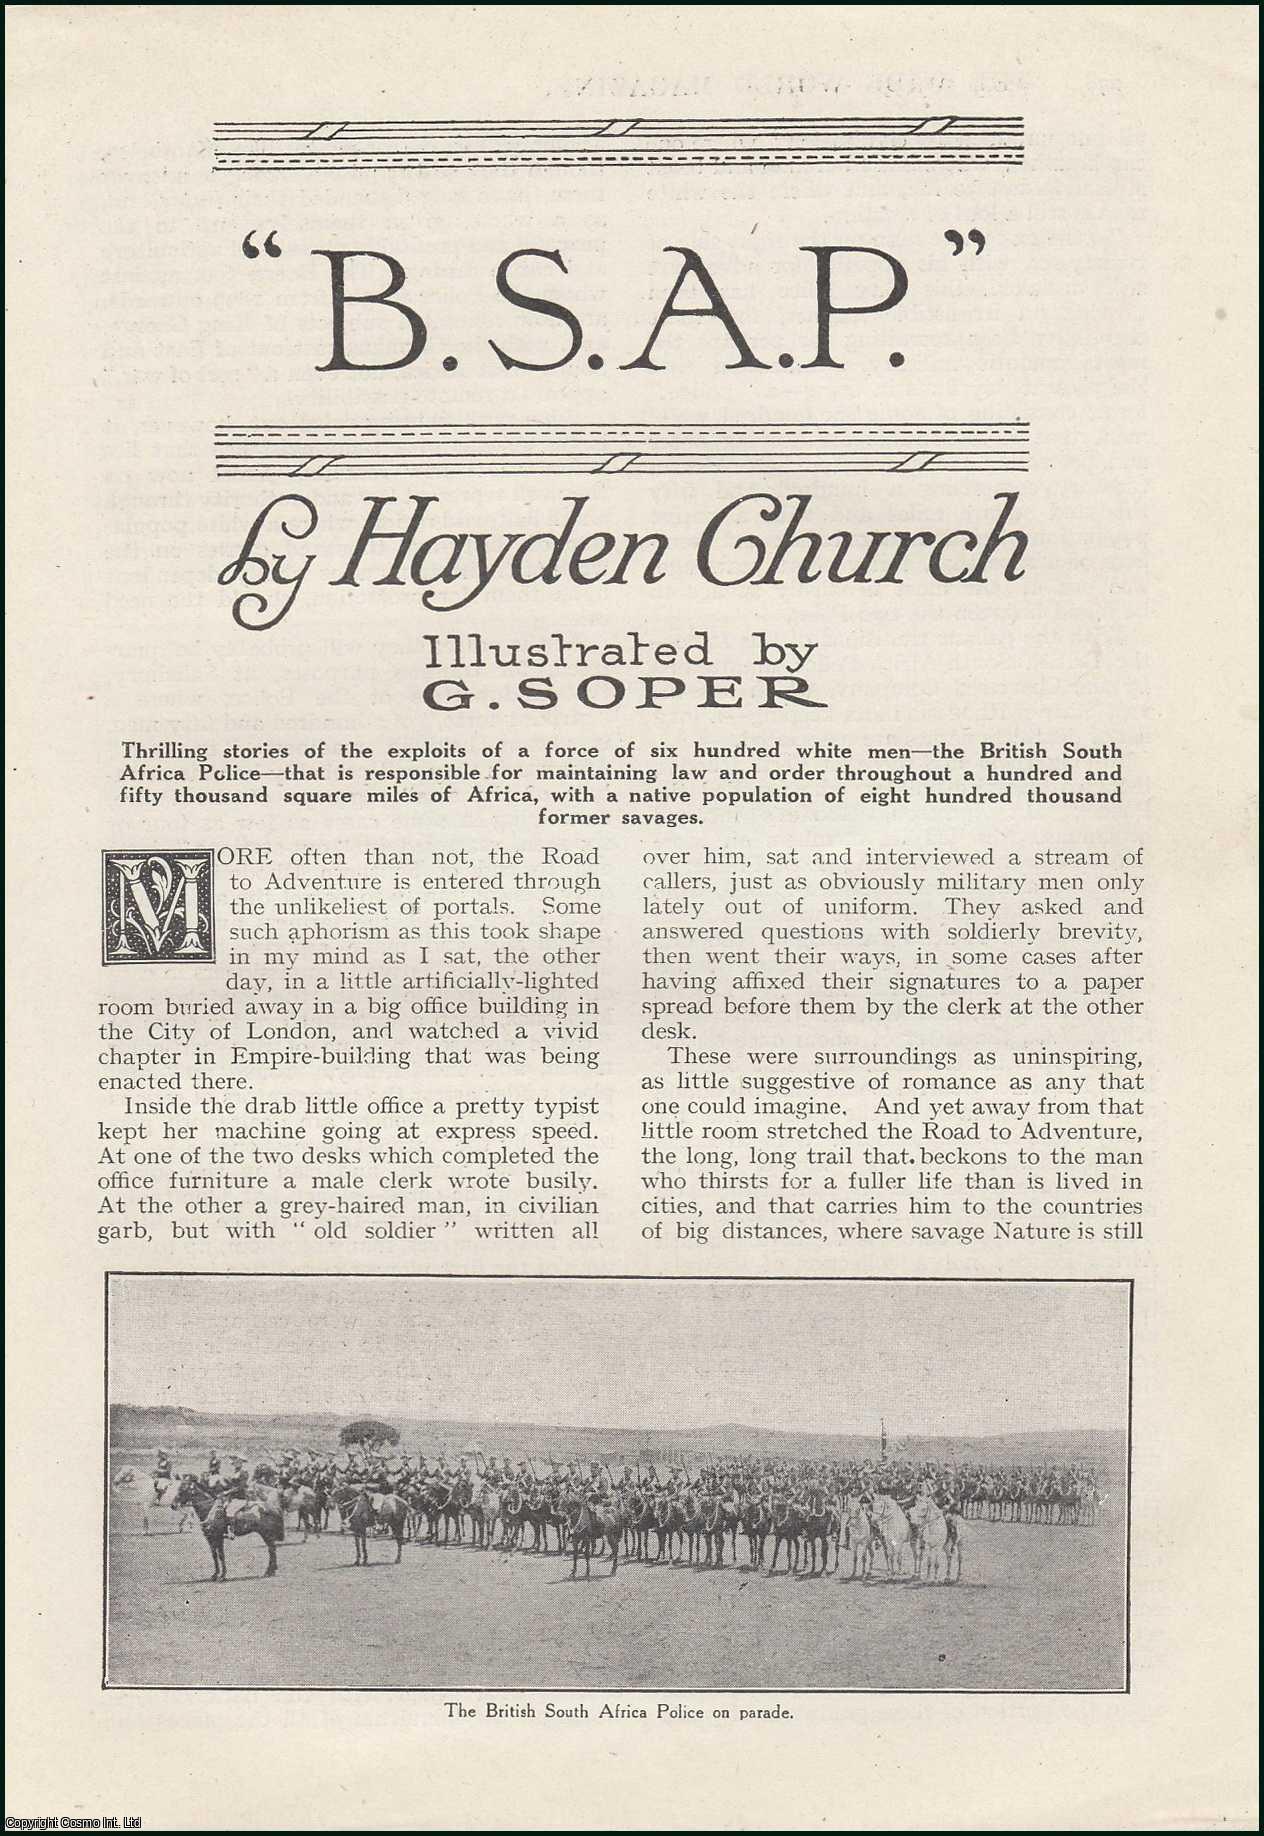 Hayden Church. Illustrated by G. Soper. - British South Africa Police : the 600 White Men responsible for Law & Order in 150,000 square miles of Africa. An uncommon original article from the Wide World Magazine, 1920.